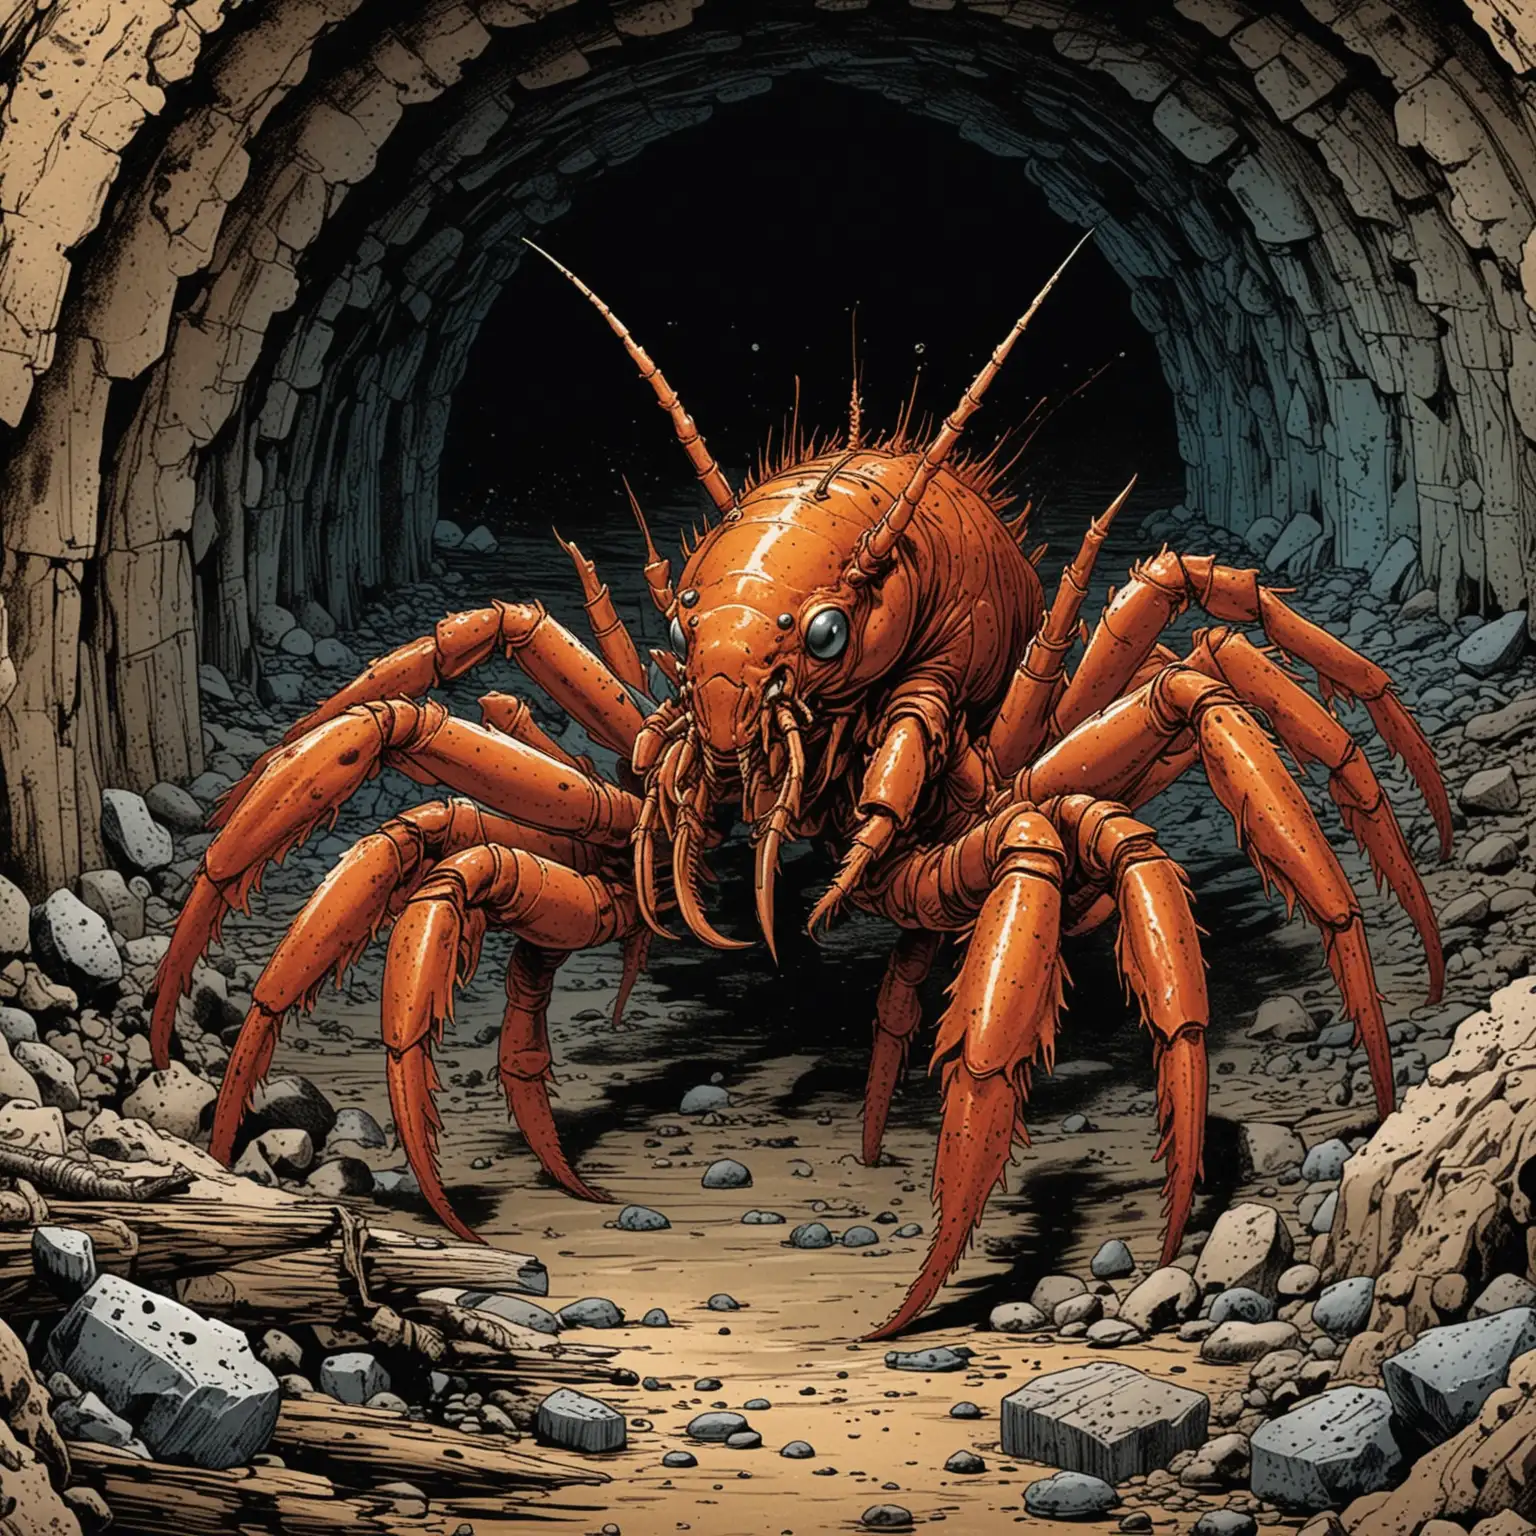 Mutant Crayfish with Powerful Pincers in Mine Tunnel